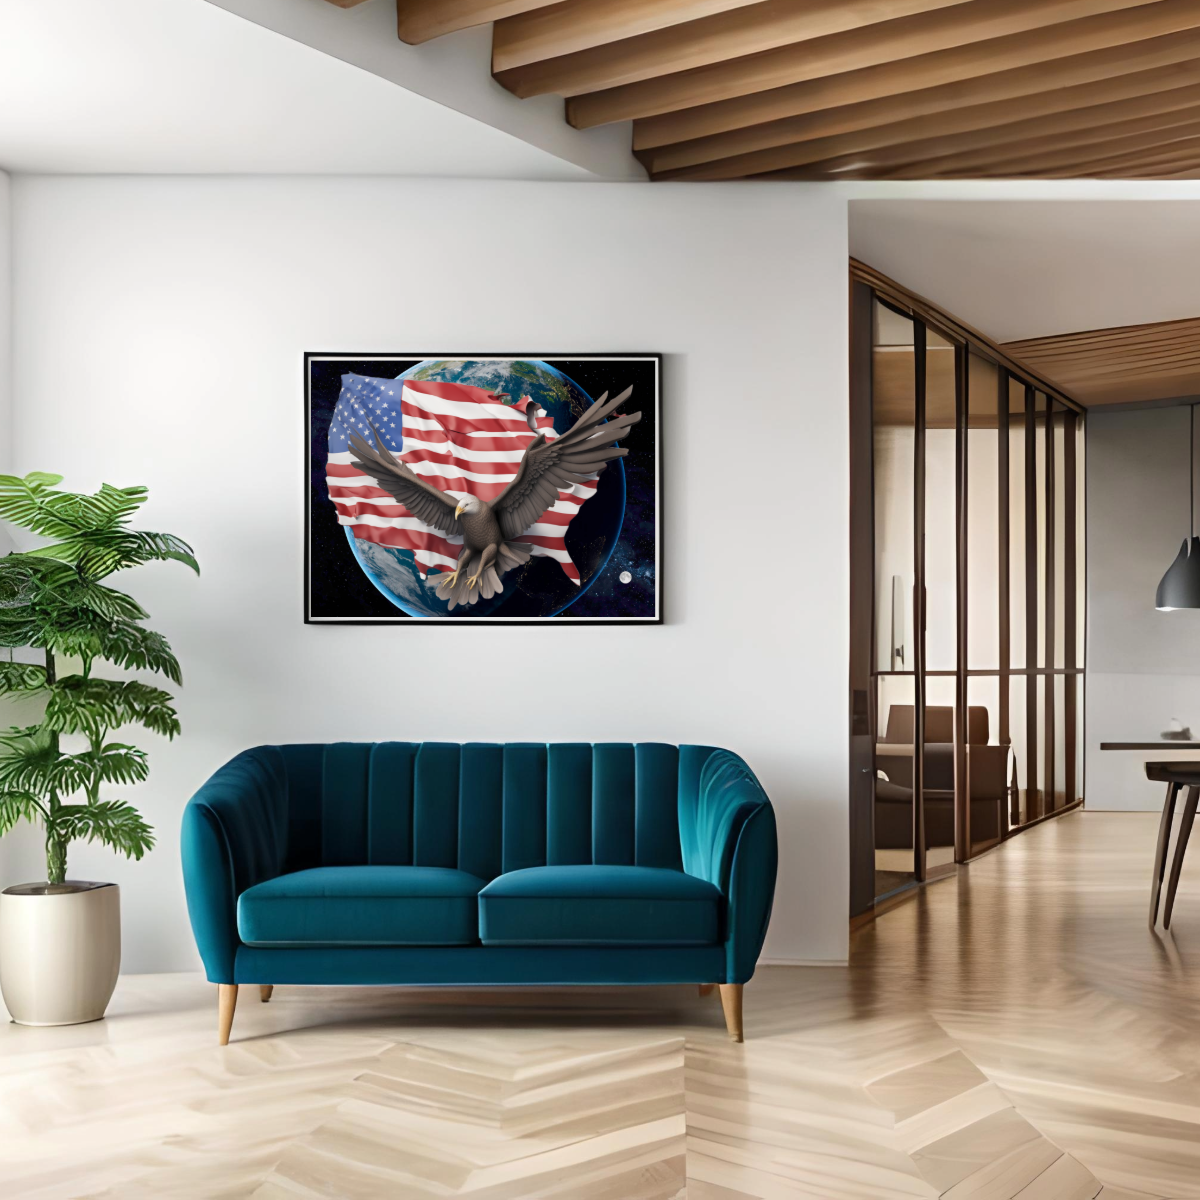 Wall Art AMERICAN FLAG #4 Canvas Print Painting Giclee 40x30 + Frame  Love Patriot Beauty Design House Home Decor Office Gift Ready to Hang